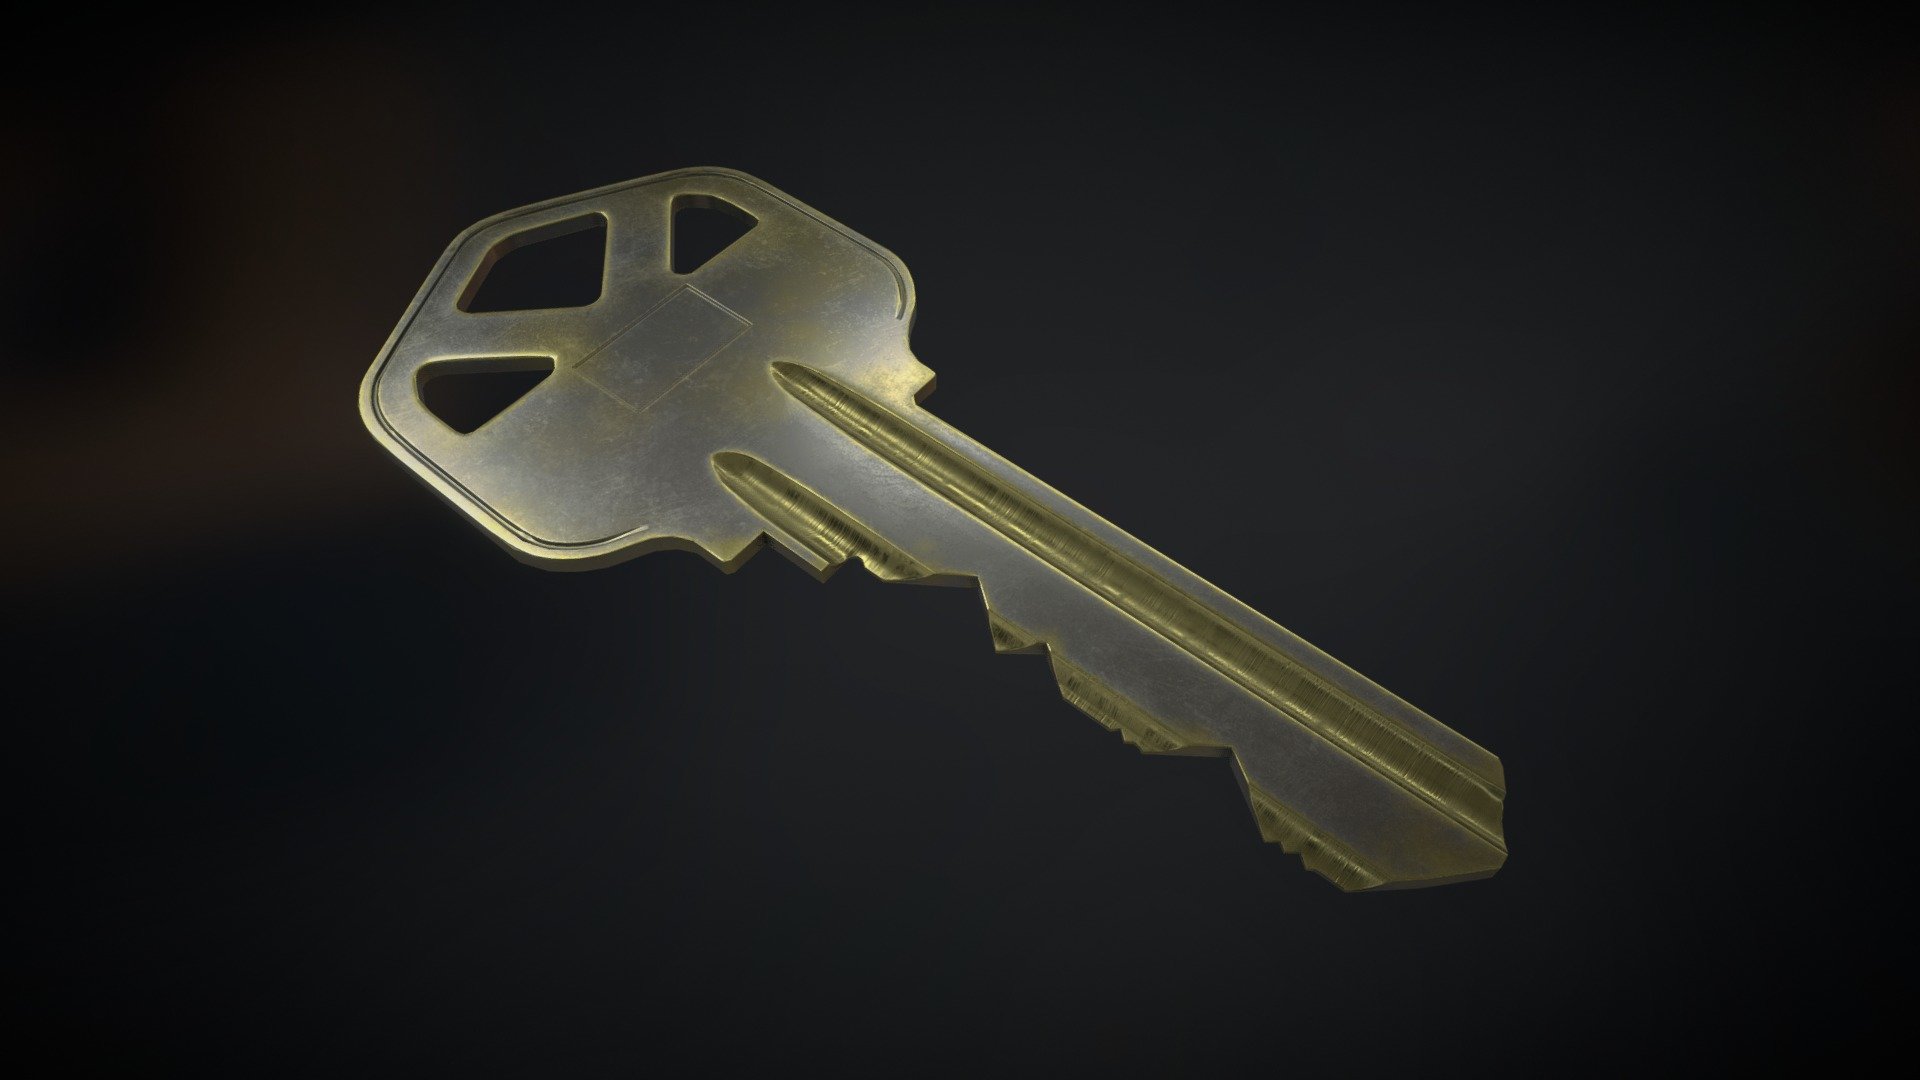 This time its a house key for free download&hellip; just doing a bit of &lsquo;pay it forward' by giving something back to the game dev community :)

Please leave any feedback about materials, modeling, etc., or whatever.  I always appreciate a good learning opportunity 3d model